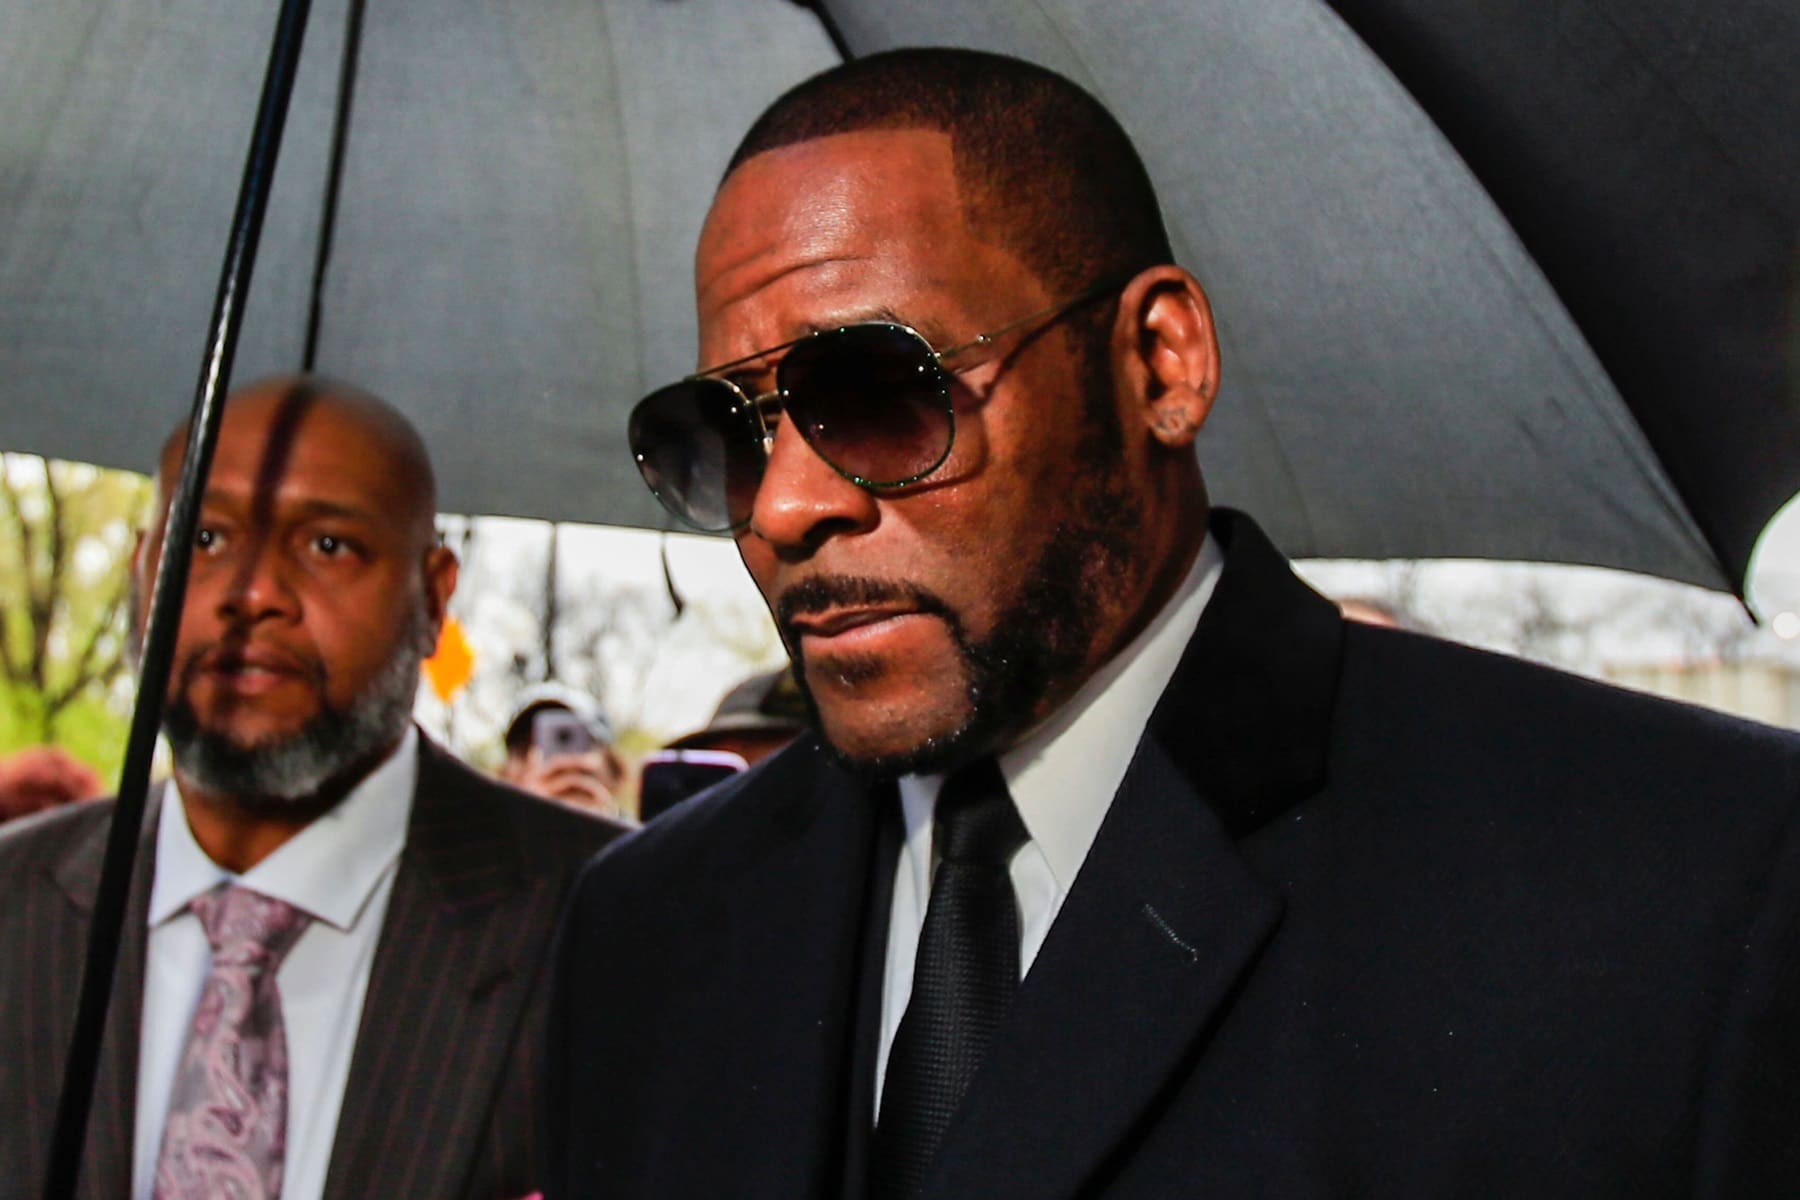 R. Kelly Lands In More Trouble And Aaliyah’s Name Is Brought Up, And ...